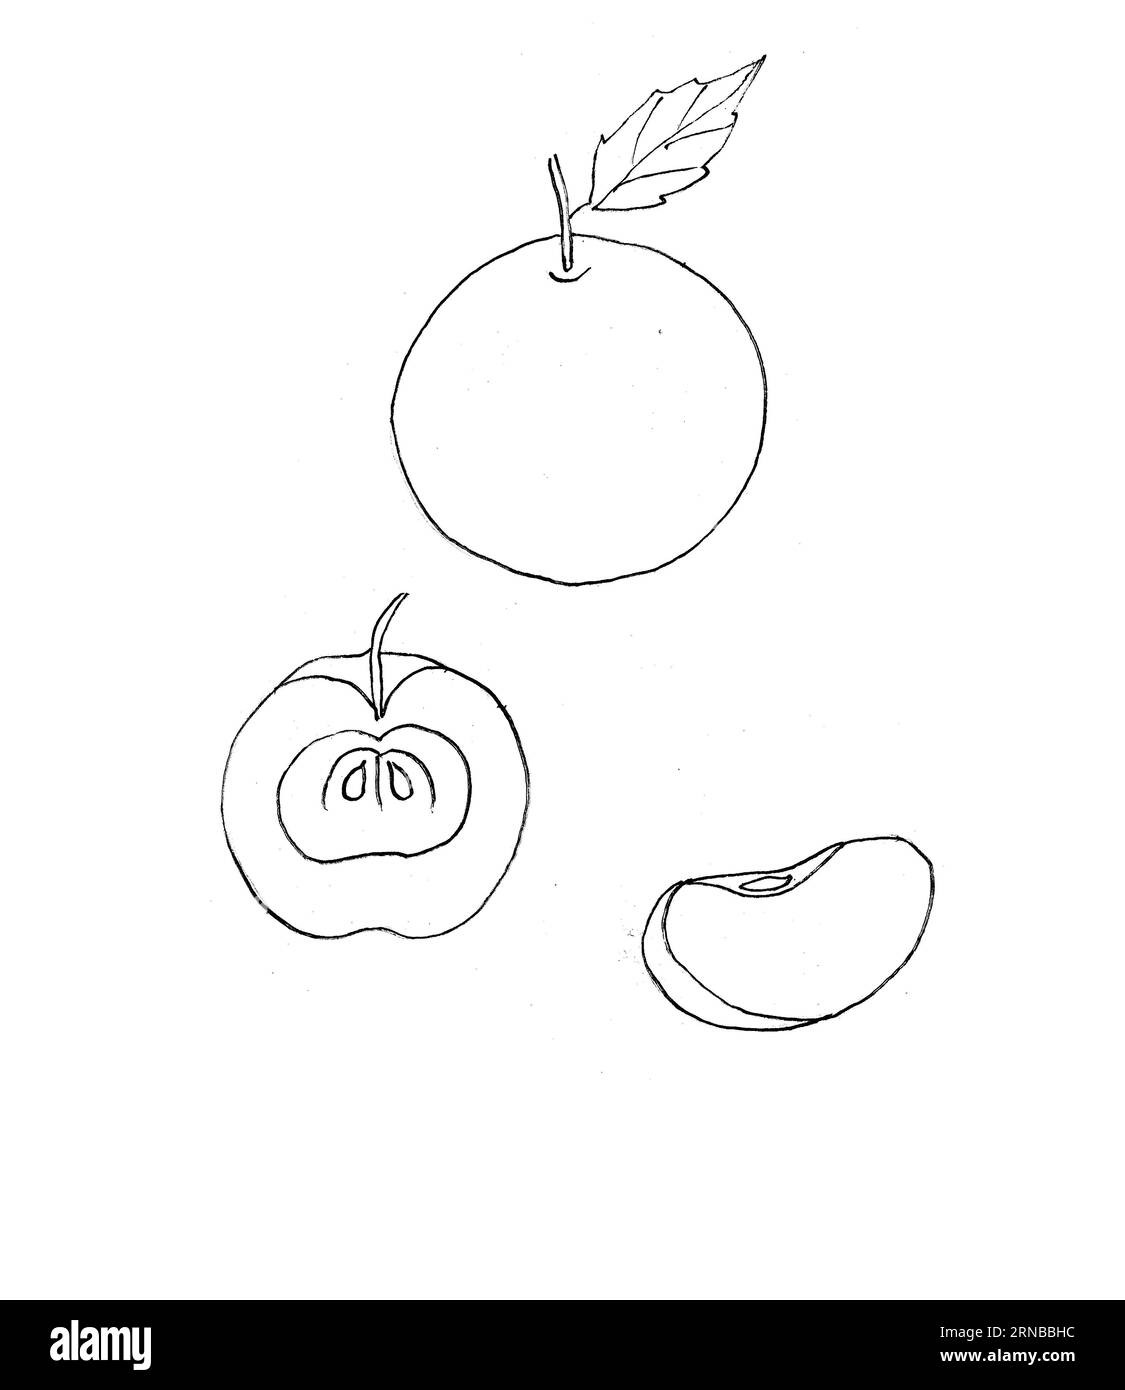 hand drawing apple whole and parts Stock Photo